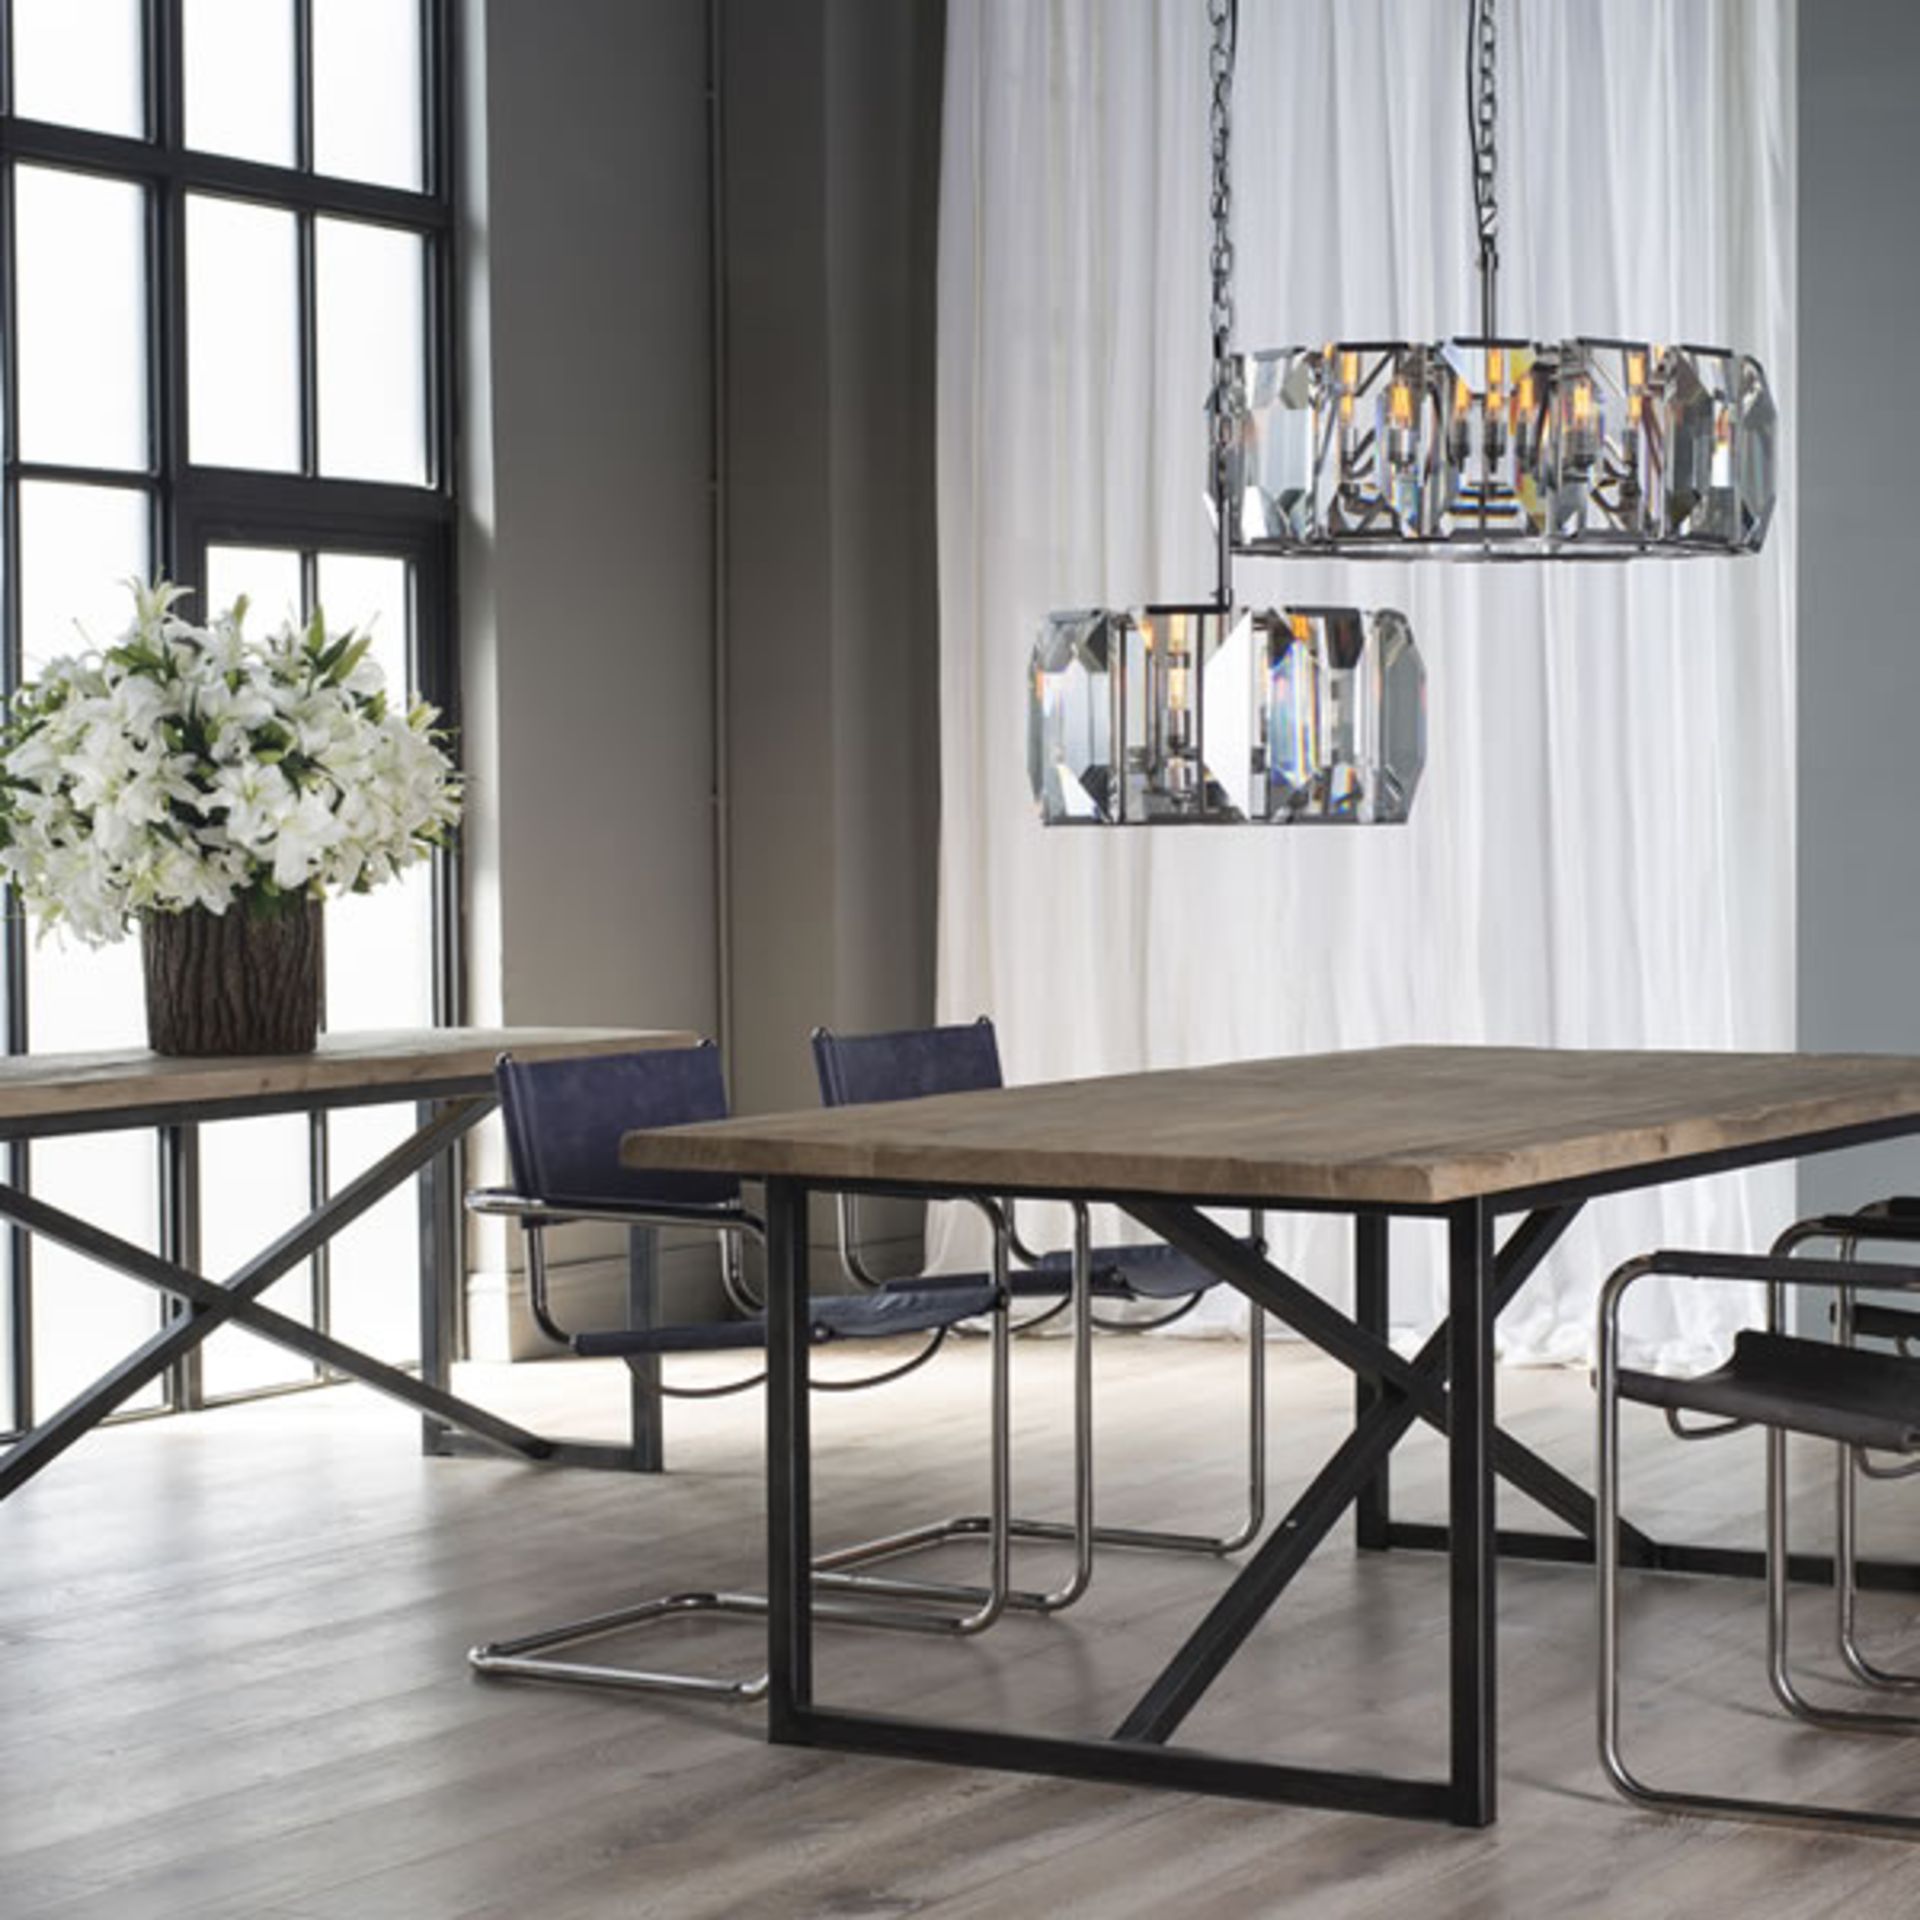 Facet Crystal Medium Chandelier Grey 78 X 78 X 42 5cm Comprises Of Sophisticated Materials: A